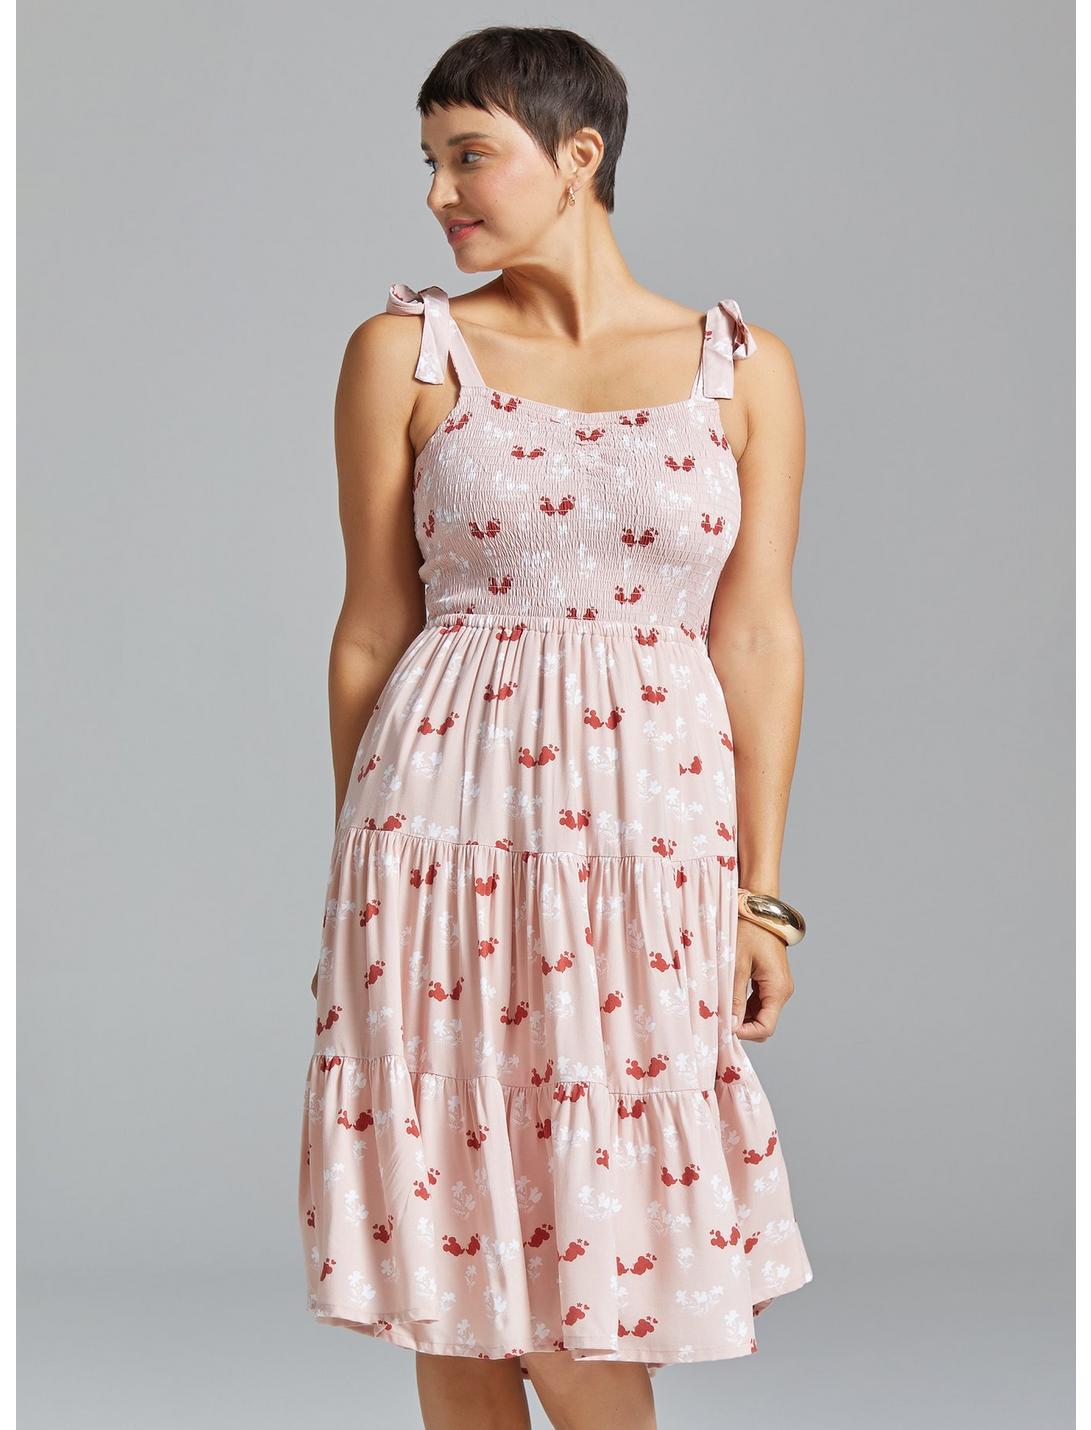 Disney Minnie Mouse Floral Allover Print Tank Dress - BoxLunch